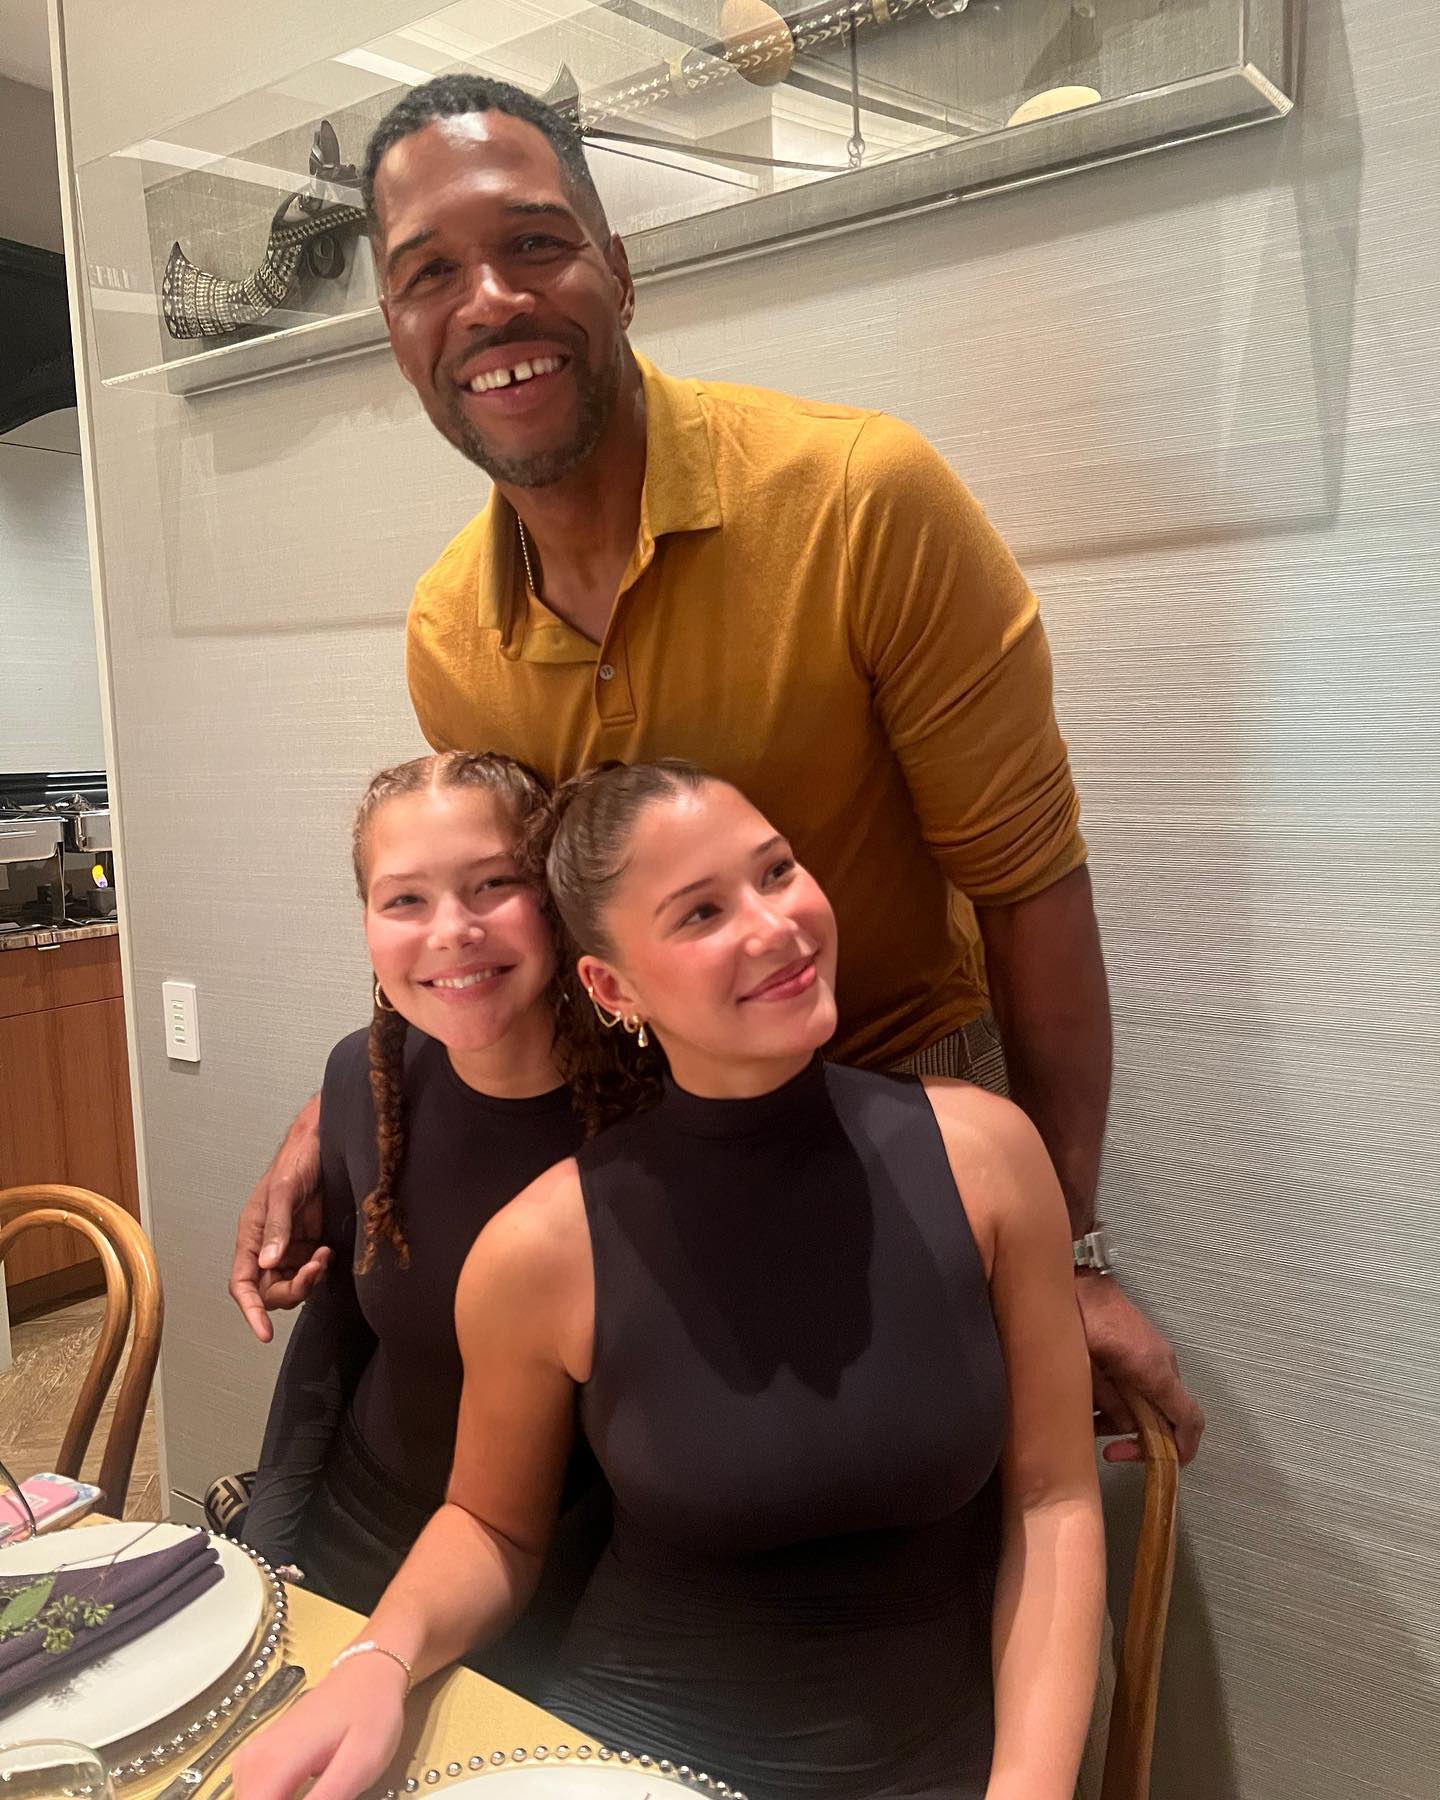 The Good Morning America host shared a photo of himself and his daughters visiting their grandmother